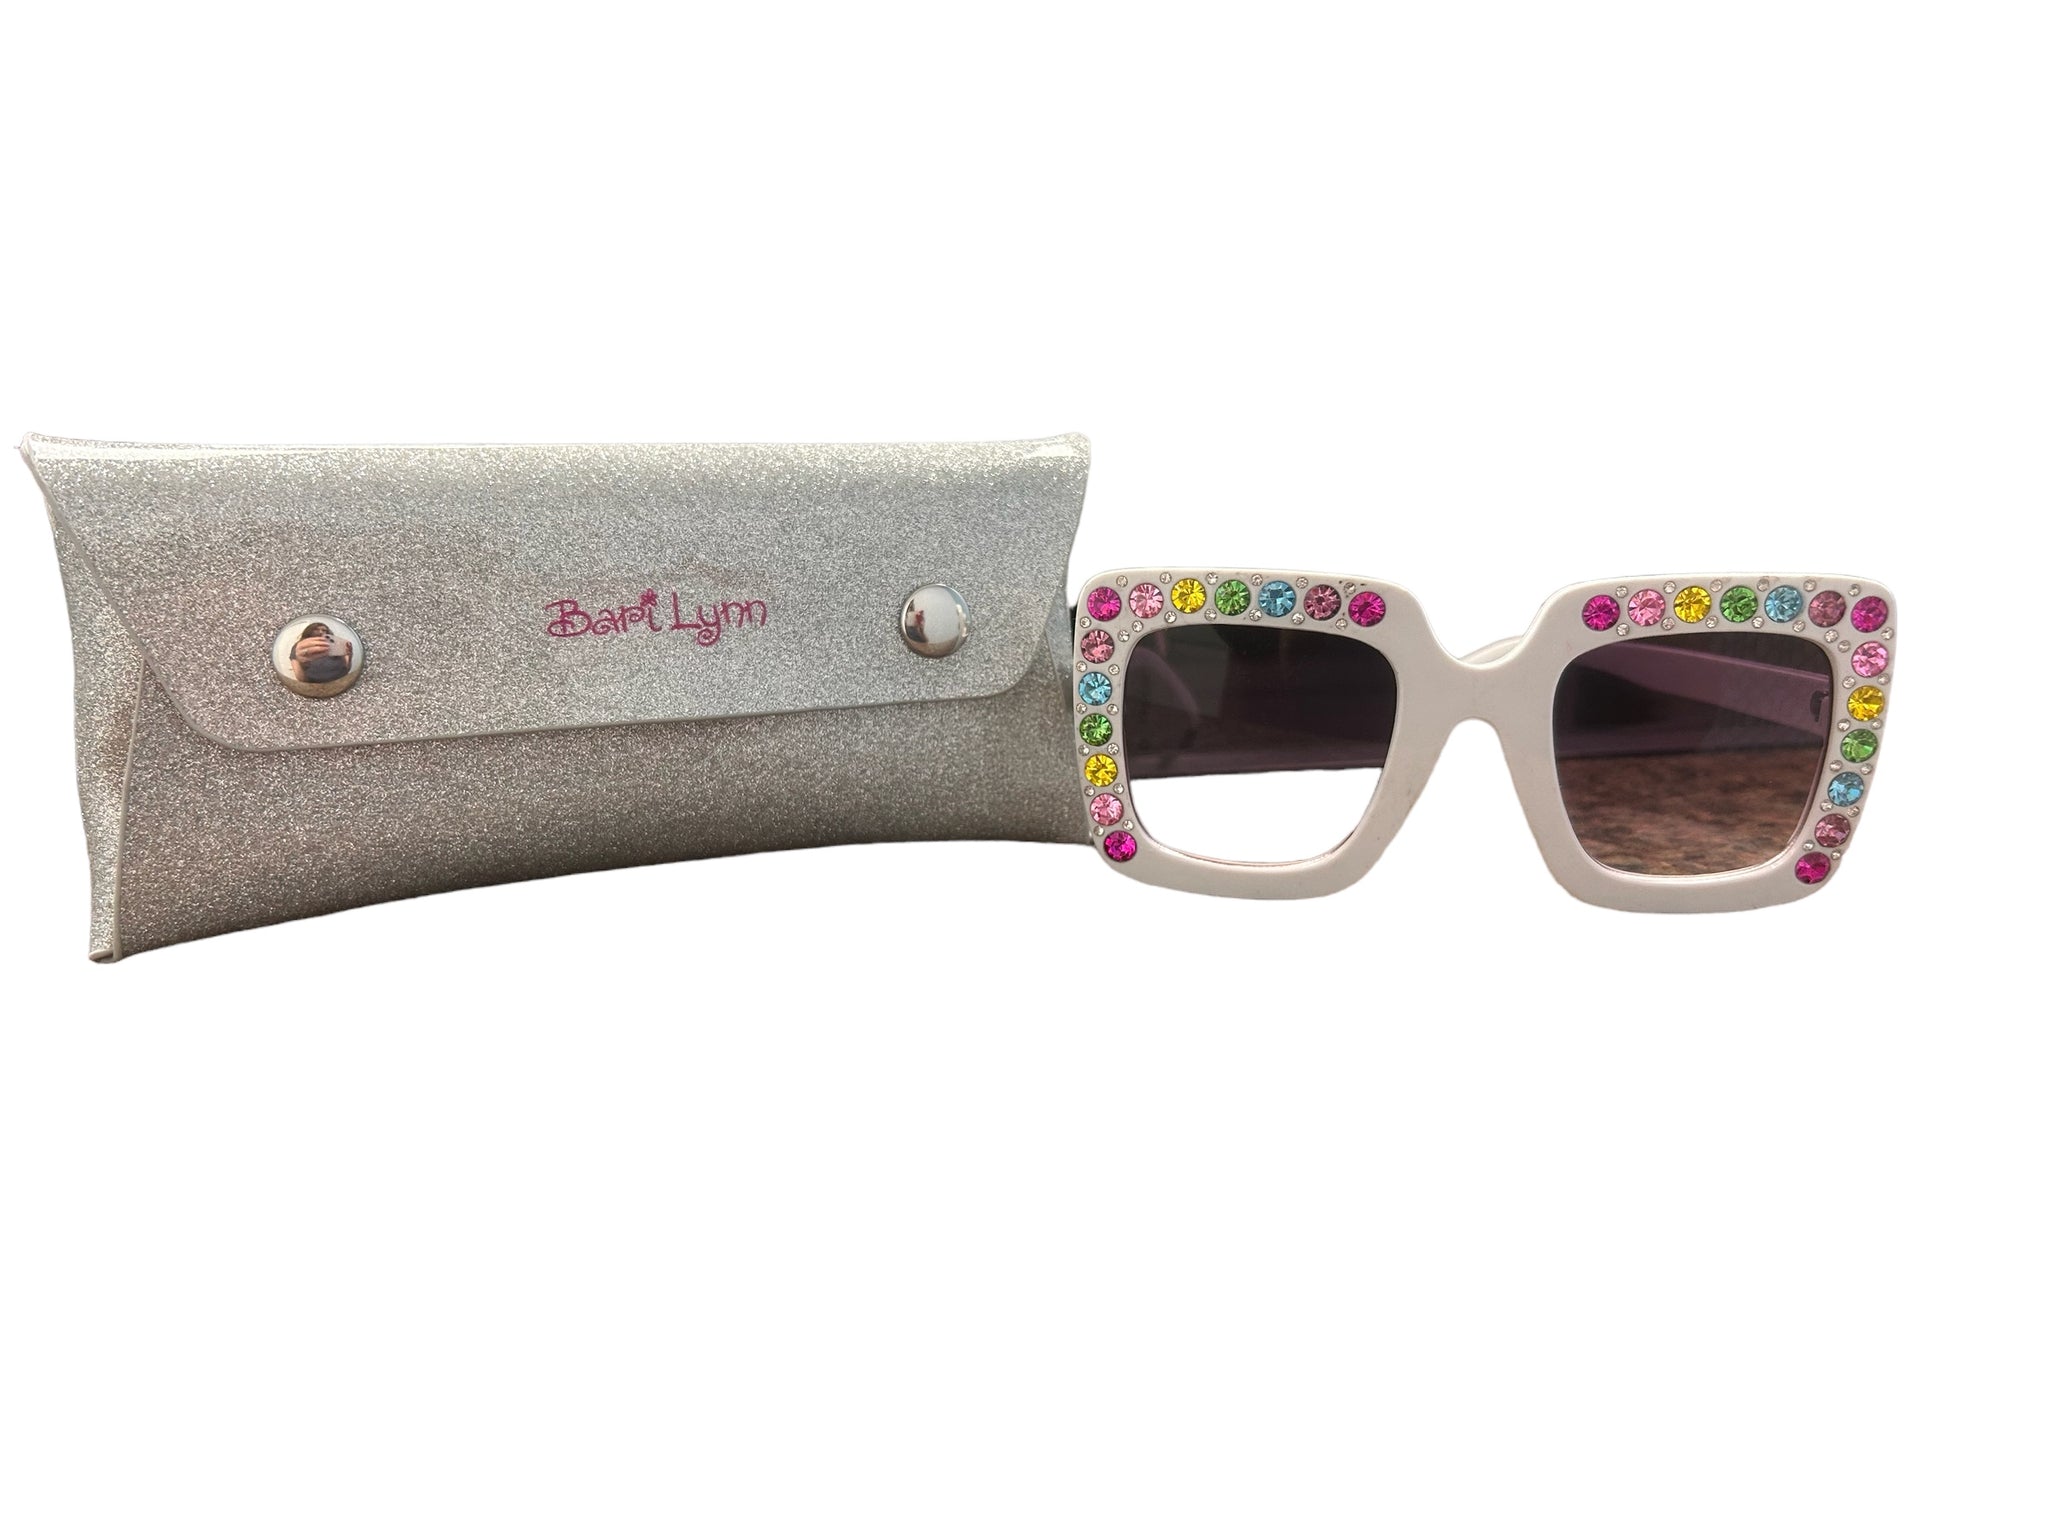 Bedazzled Sunglasses with Case